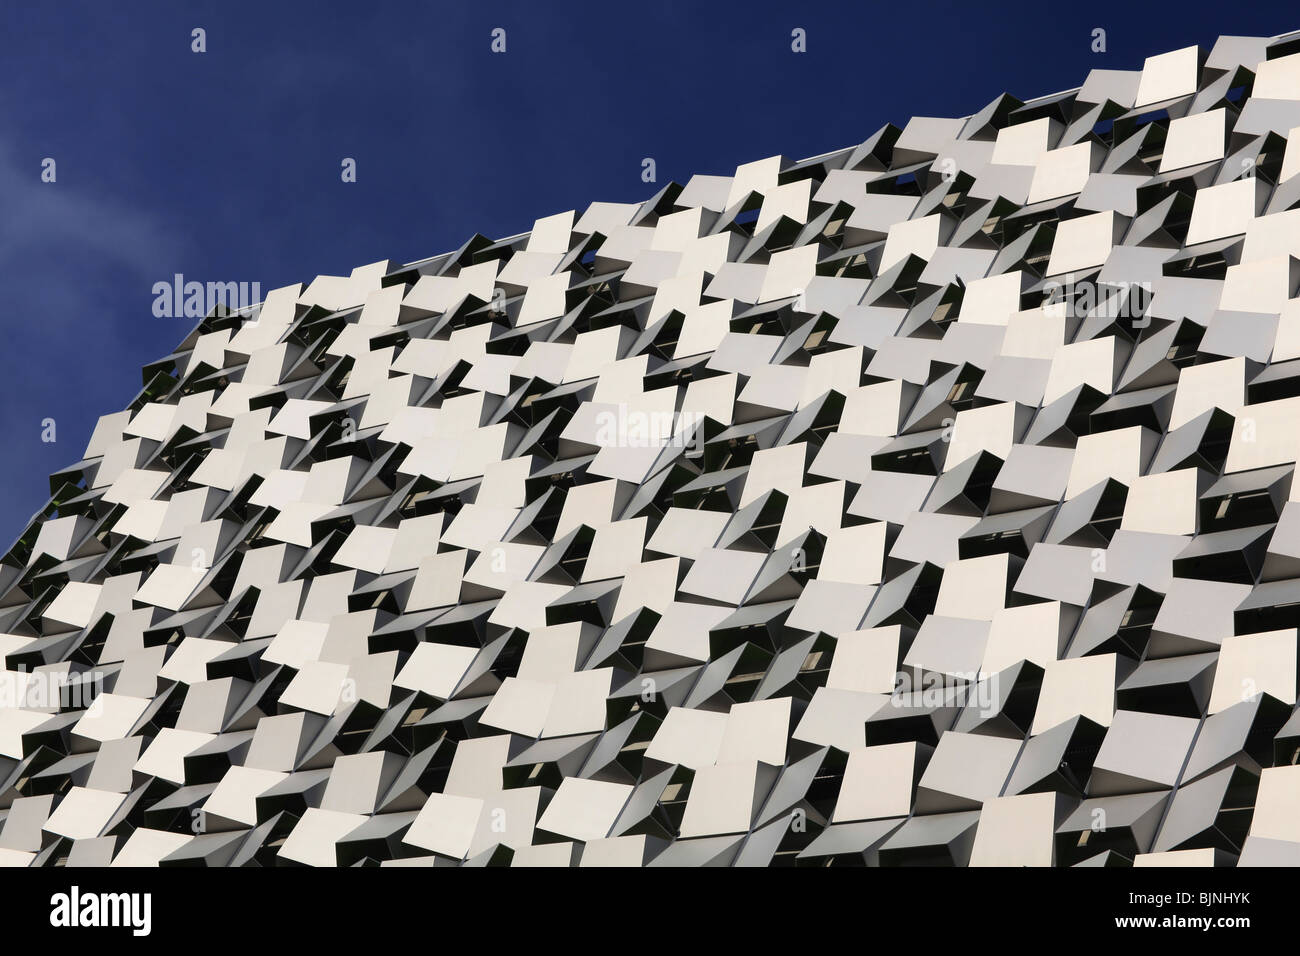 The cheese grater or cheesegrater multi-storey car park in Sheffield against a blue sky Stock Photo